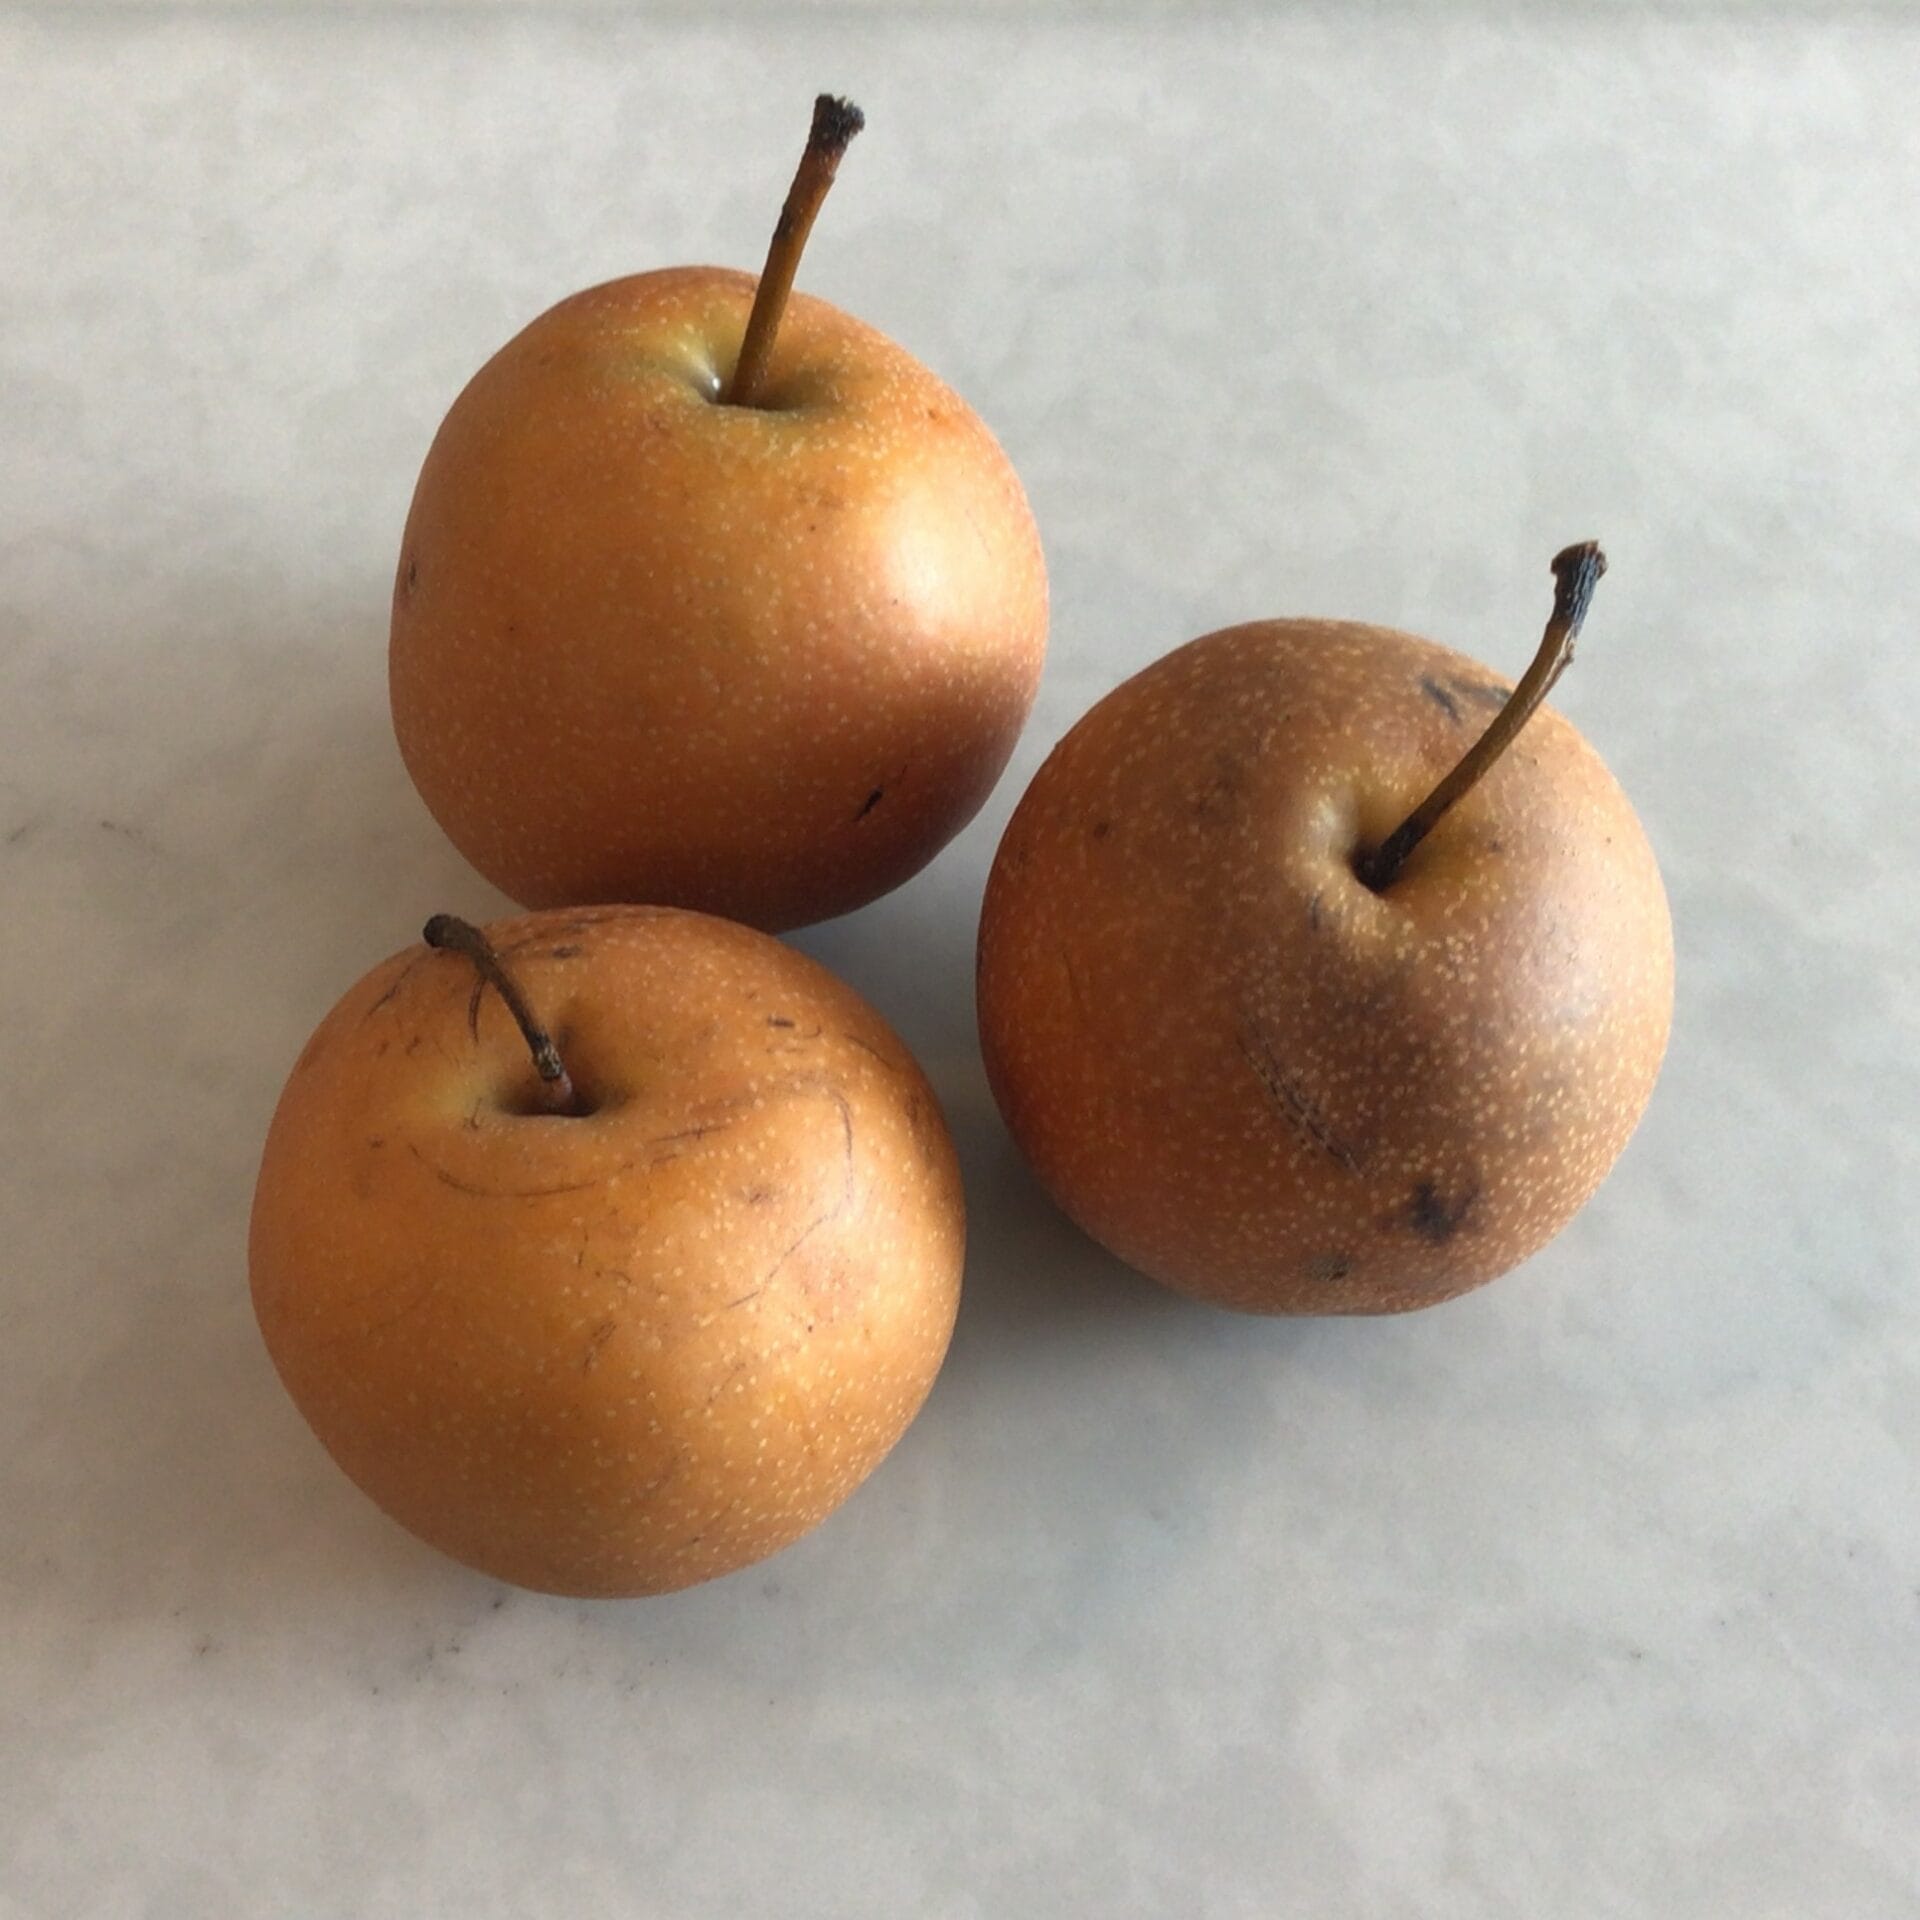 Frozen local asian pears